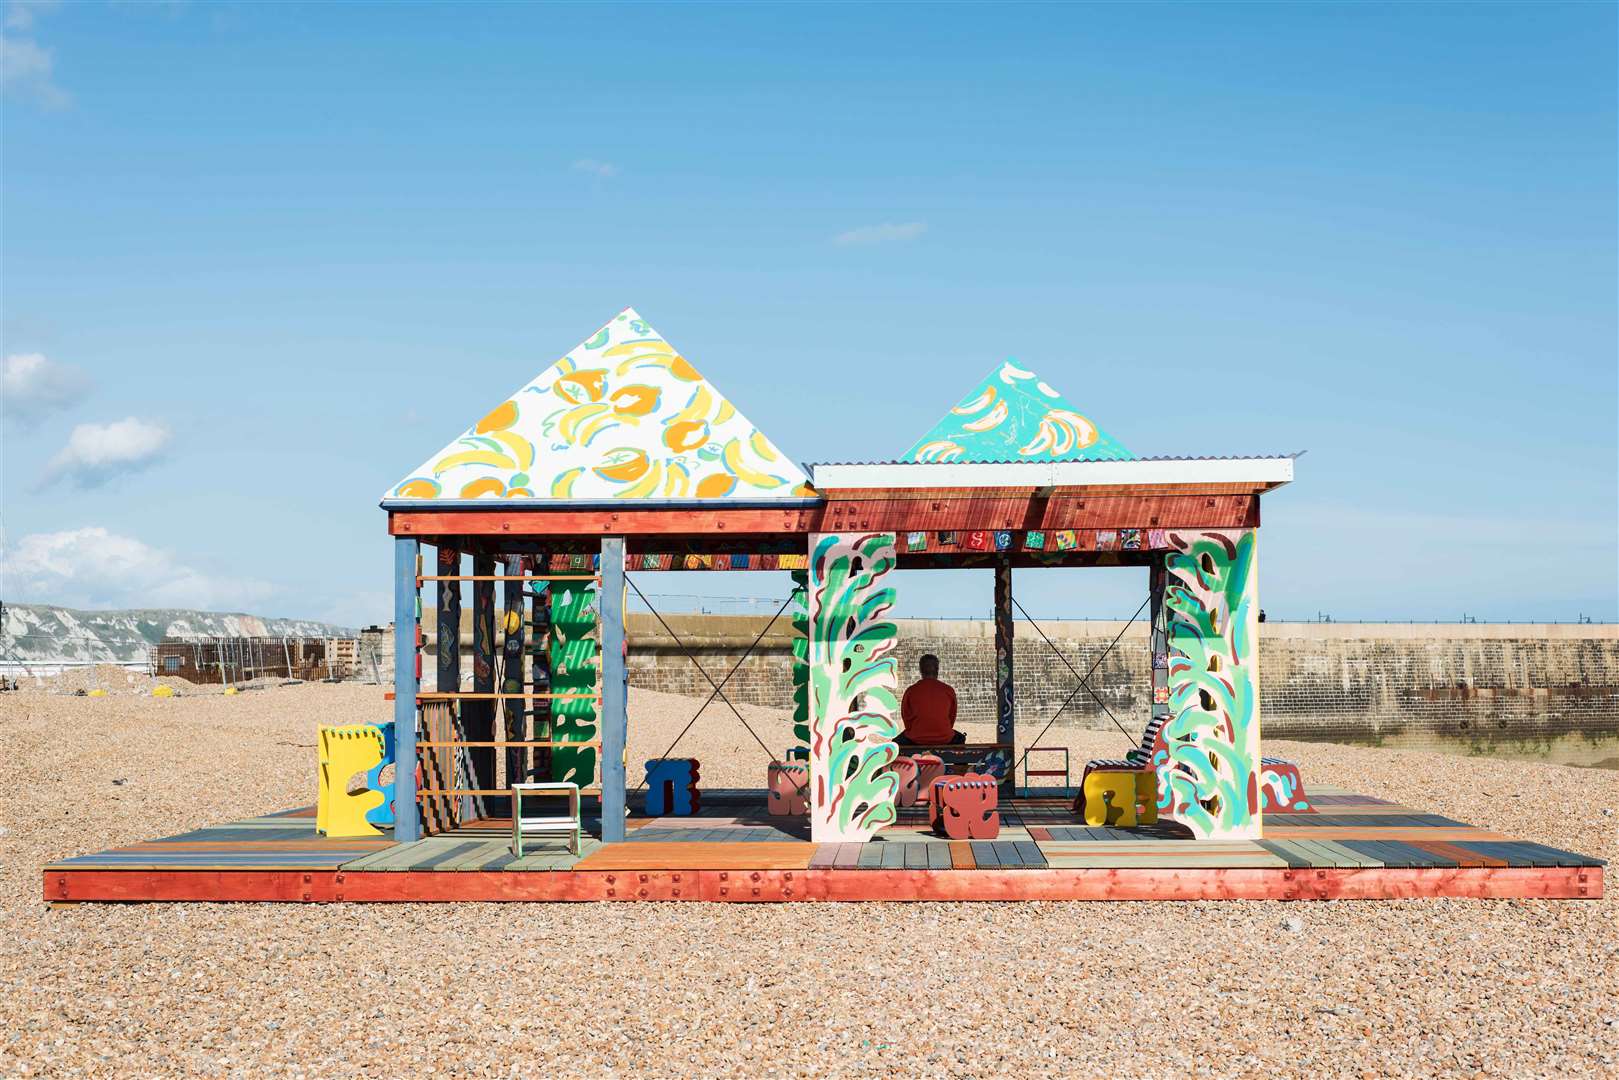 Artist Sol Calero's seafront Sea Pavilion in Folkestone Picture: Thierry Bal